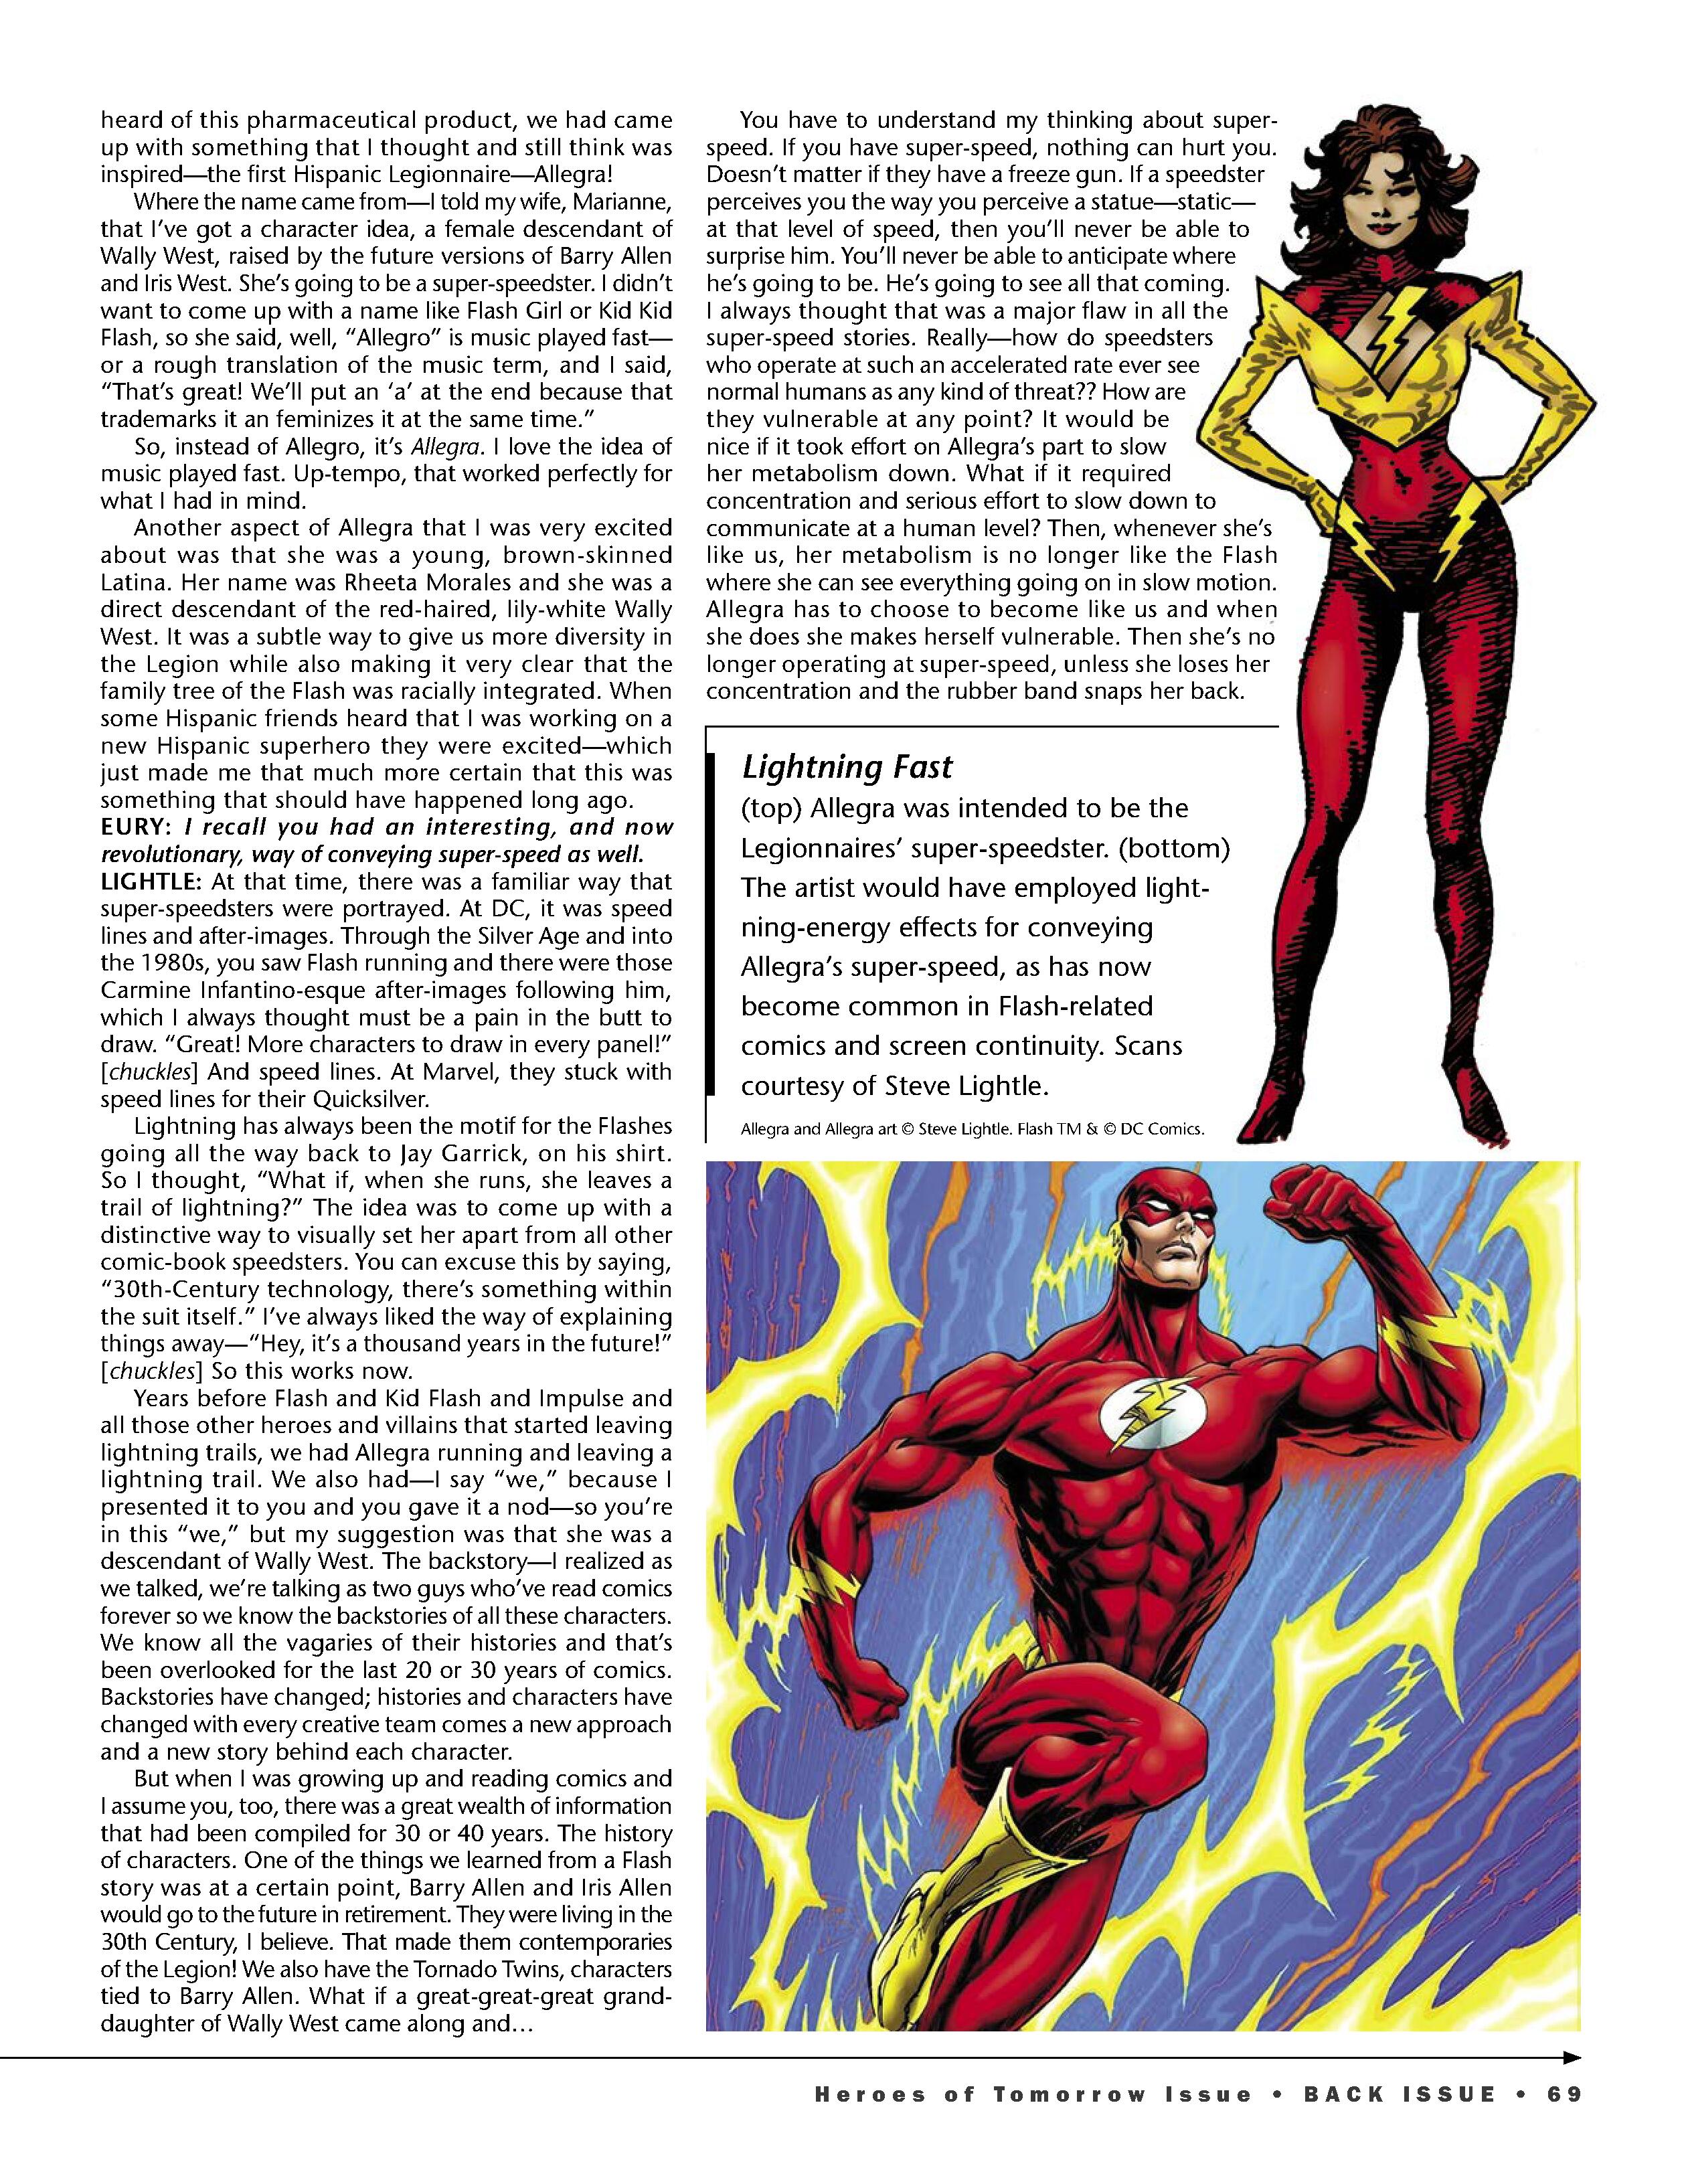 Read online Back Issue comic -  Issue #120 - 71